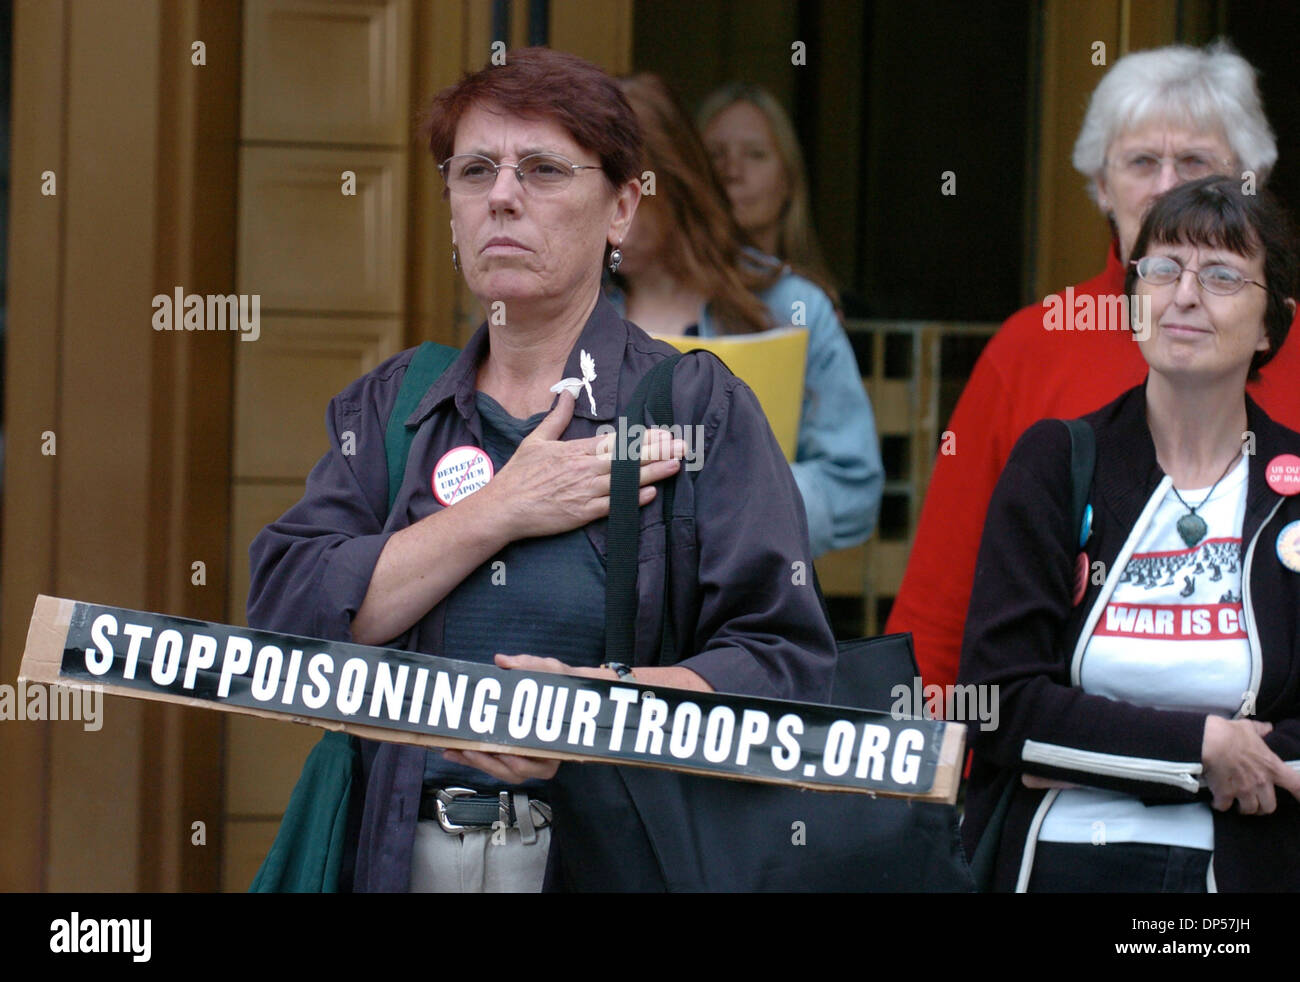 Sep 06, 2006; Manhattan, NY, USA; Supporter ANGELA MORANO of NY holds a sign as she exits Federal Court. Former members of the U.S. Army that served in Iraq attend a hearing in Manhattan Federal Court on the validity of a lawsuit they filed in 2005 against the U.S. Government for compensation for their illnesses and medical expenses for 'Gulf War Syndrome' symptoms they say are rel Stock Photo